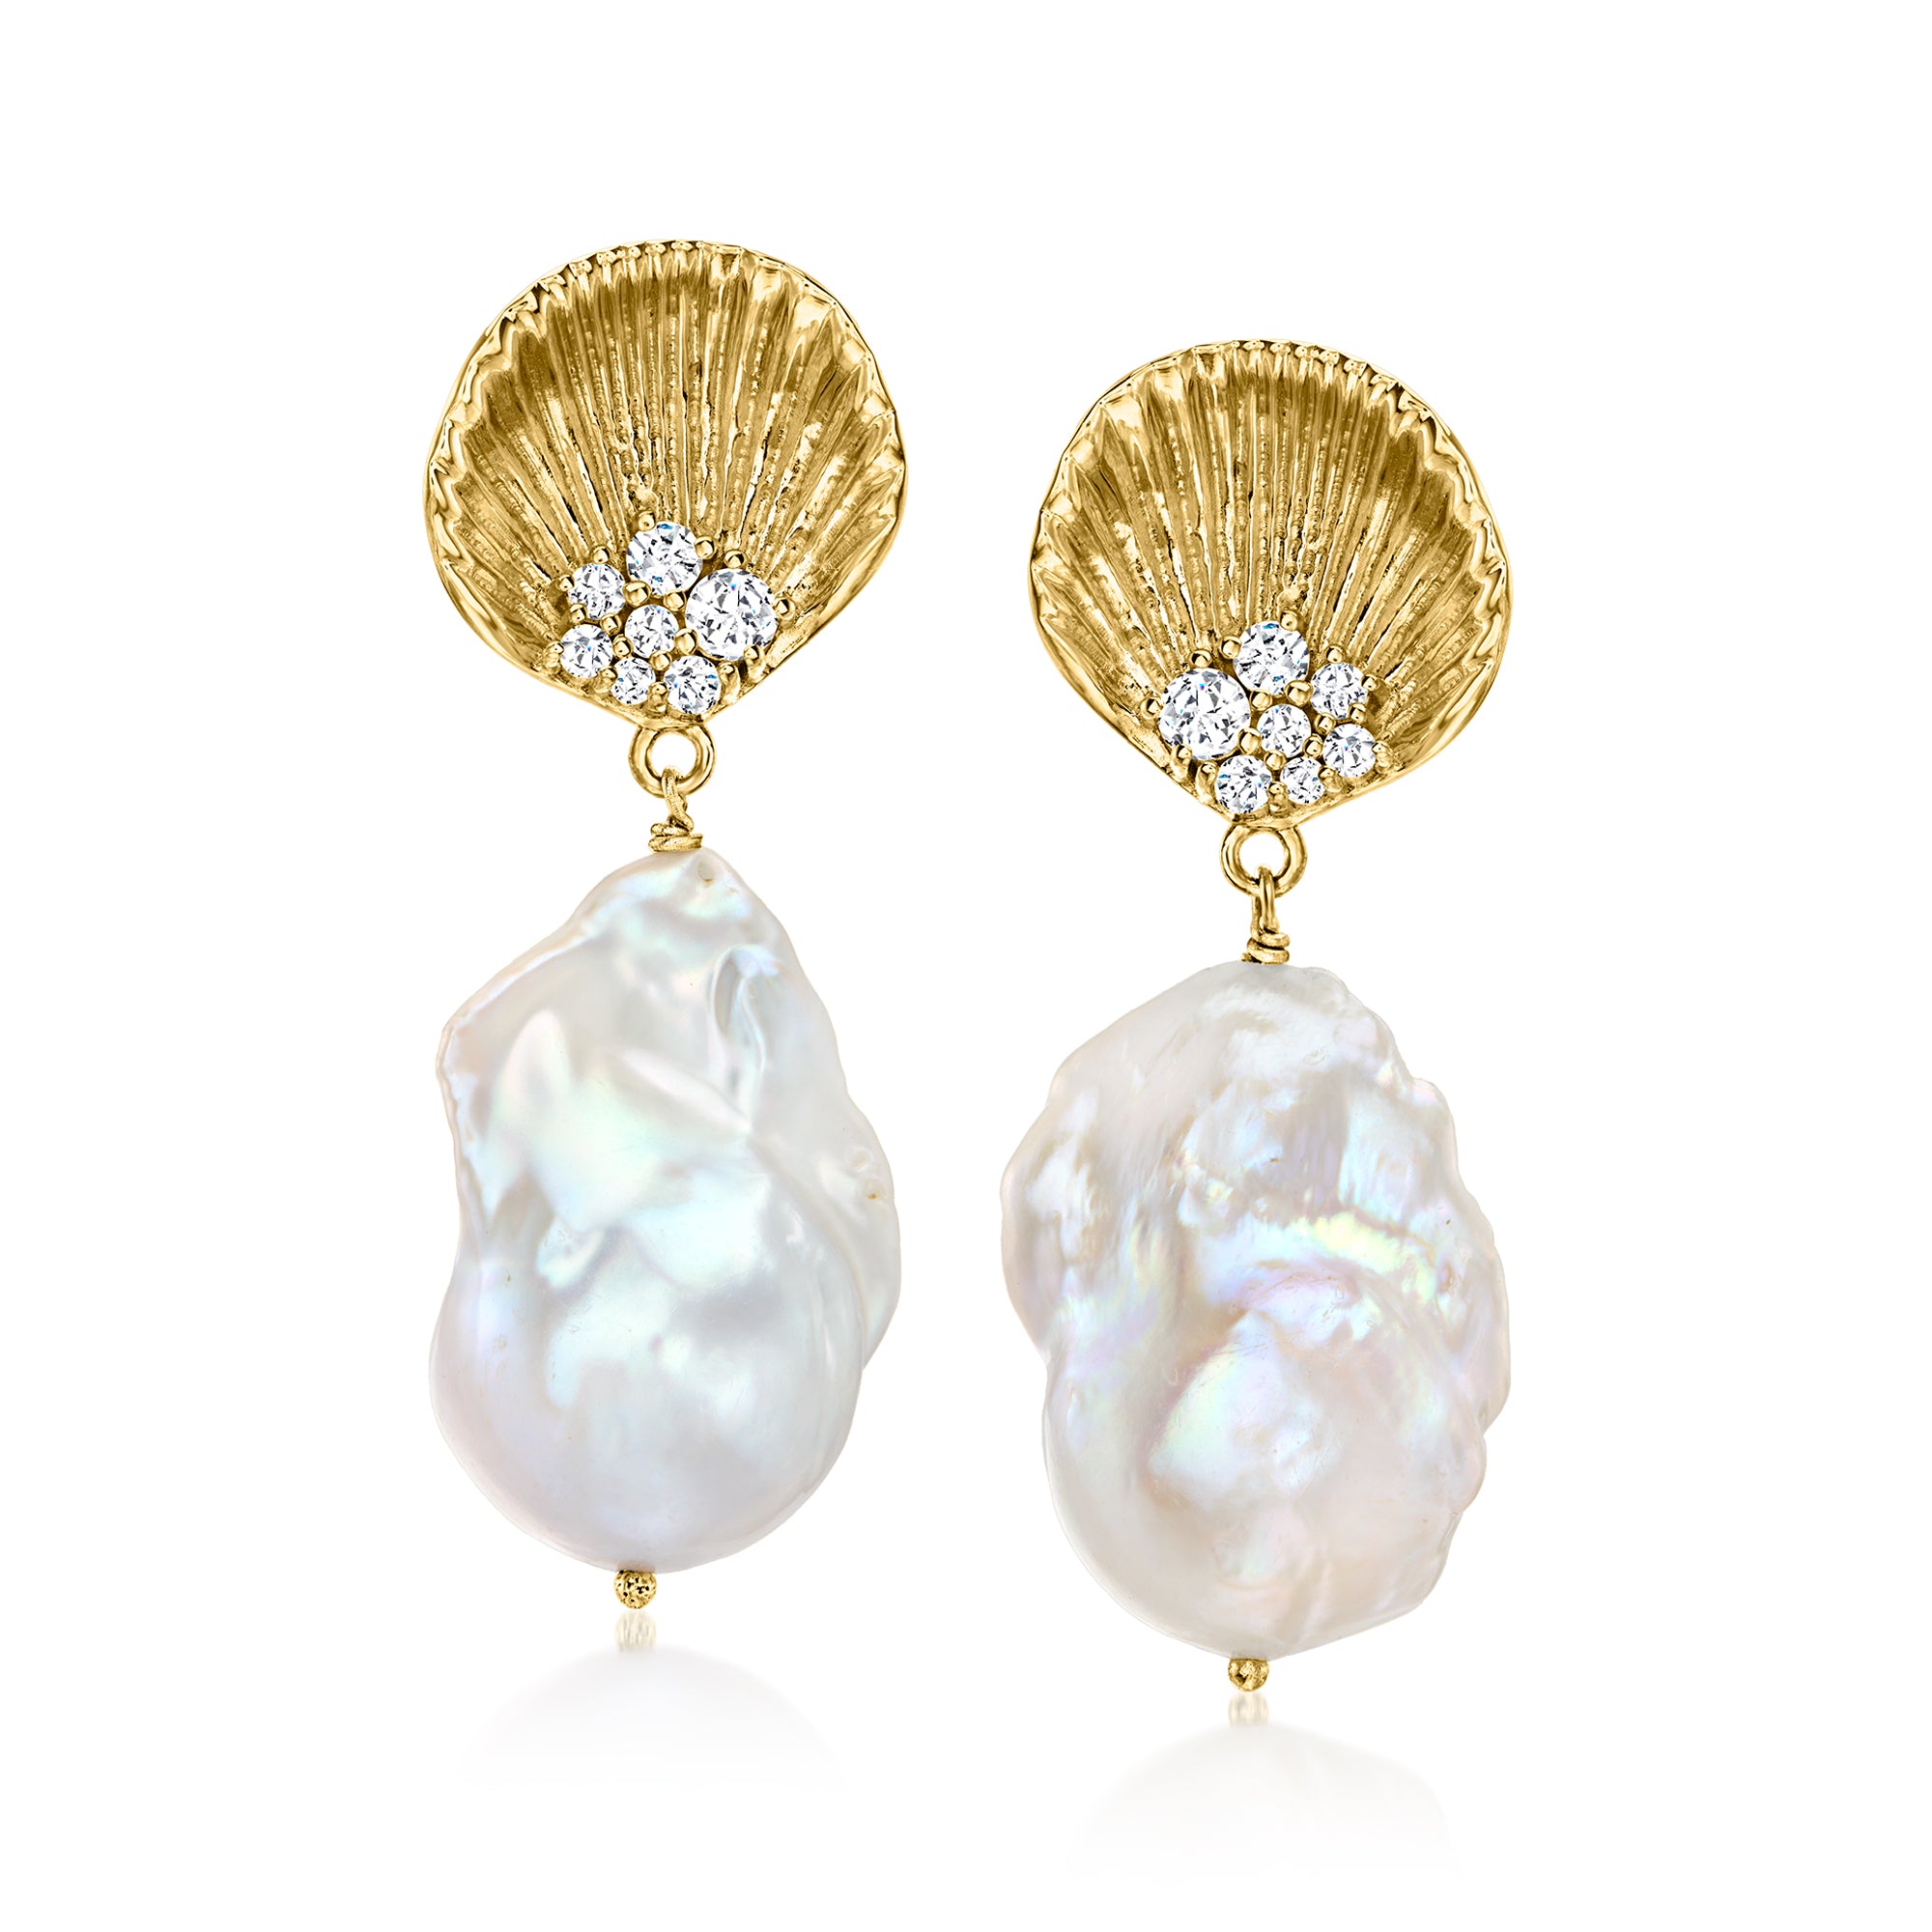 Ross-simons 14-17mm Cultured Pearl And . White Topaz Shell Drop Earrings In 18kt Gold Over Sterling